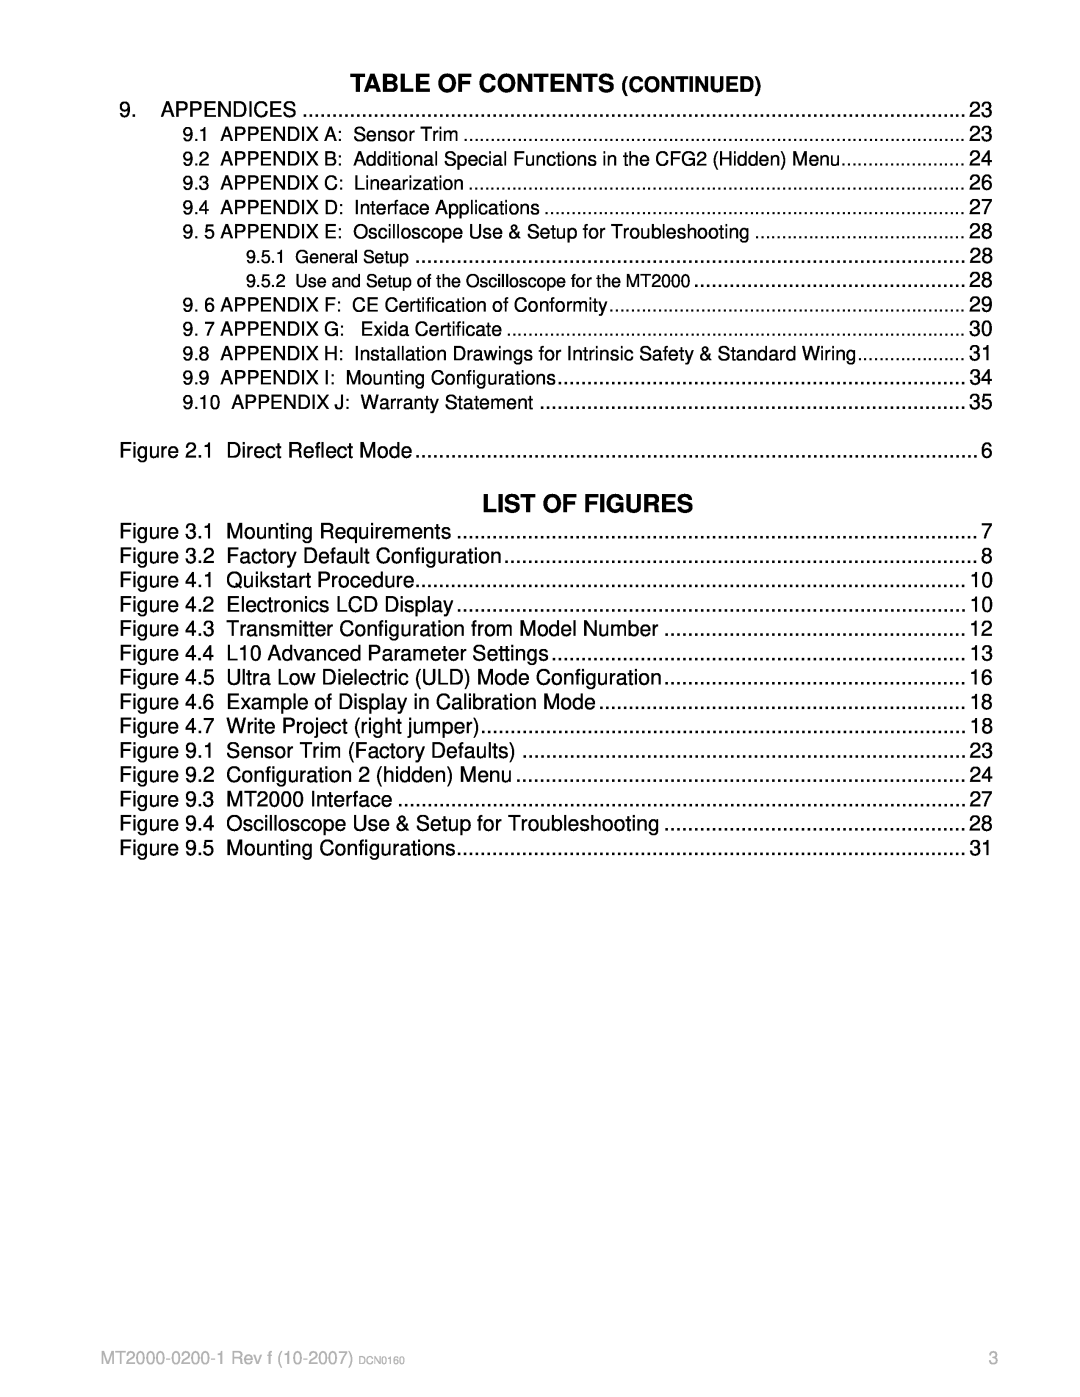 K-Tec MT2000 manual Table Of Contents Continued, List Of Figures 